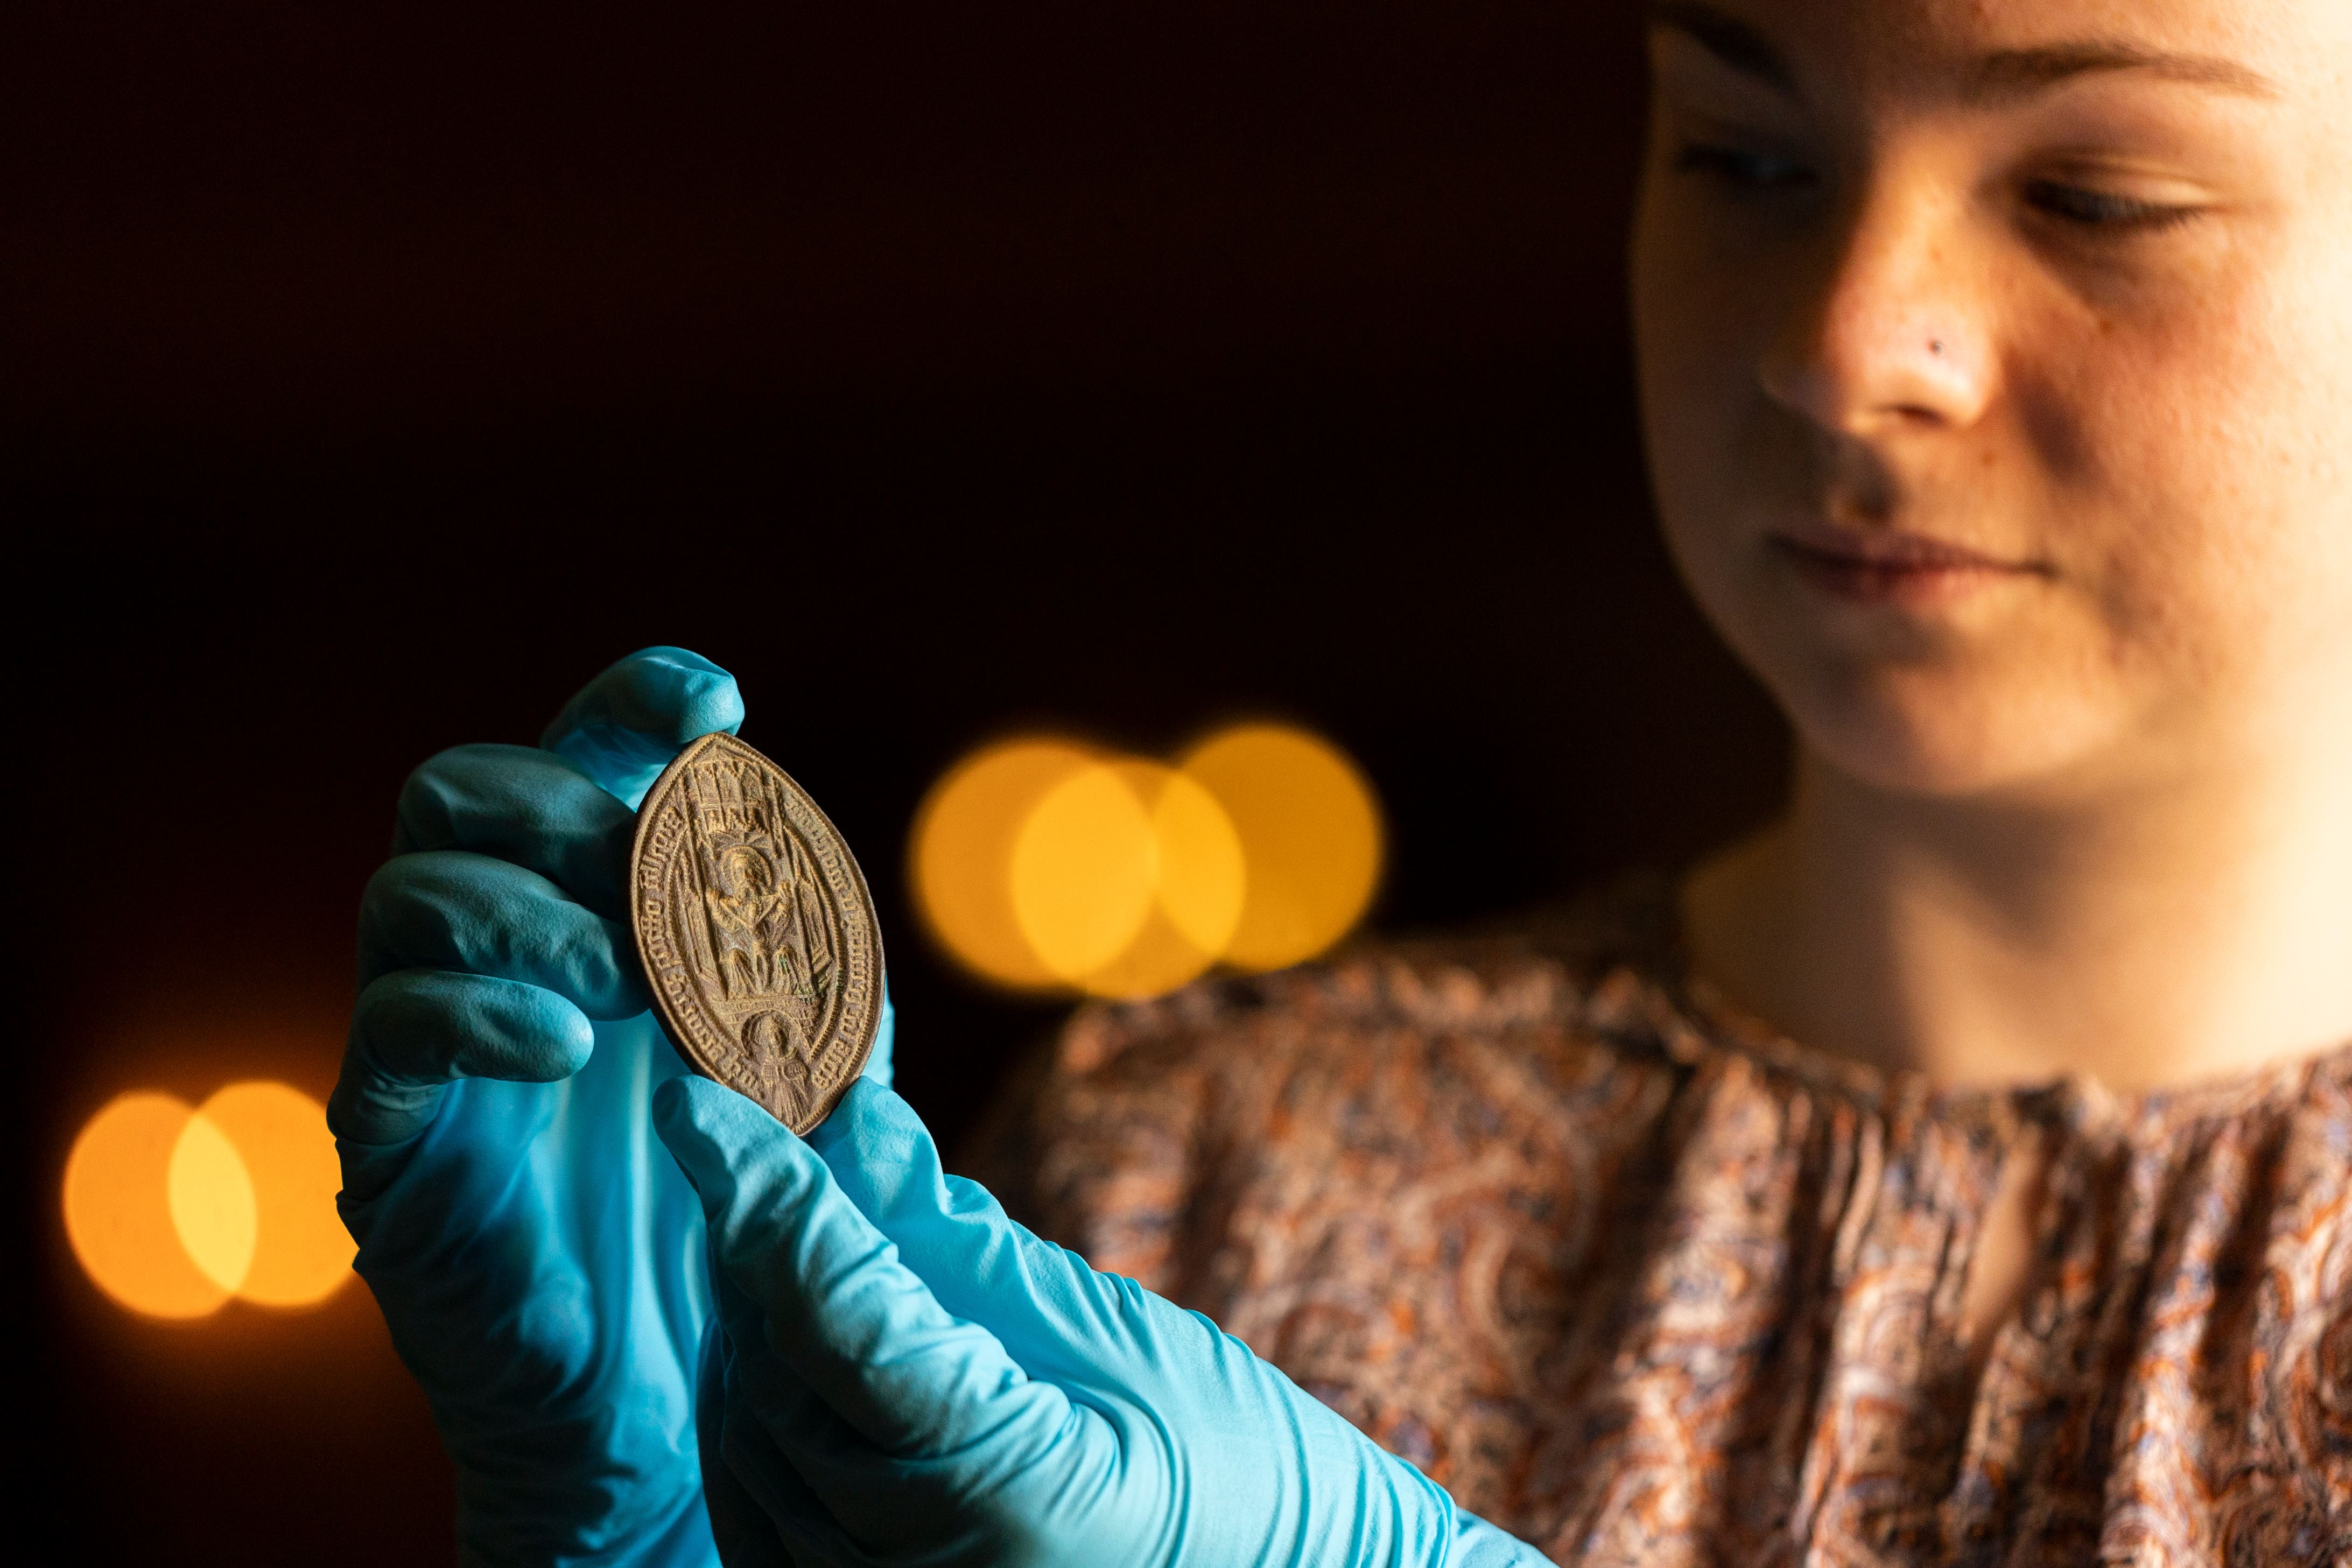 A recently discovered seal from the medieval period is to go on display at the National Trust site of Mottisfont in Hampshire (National/Trust/PA Wire)